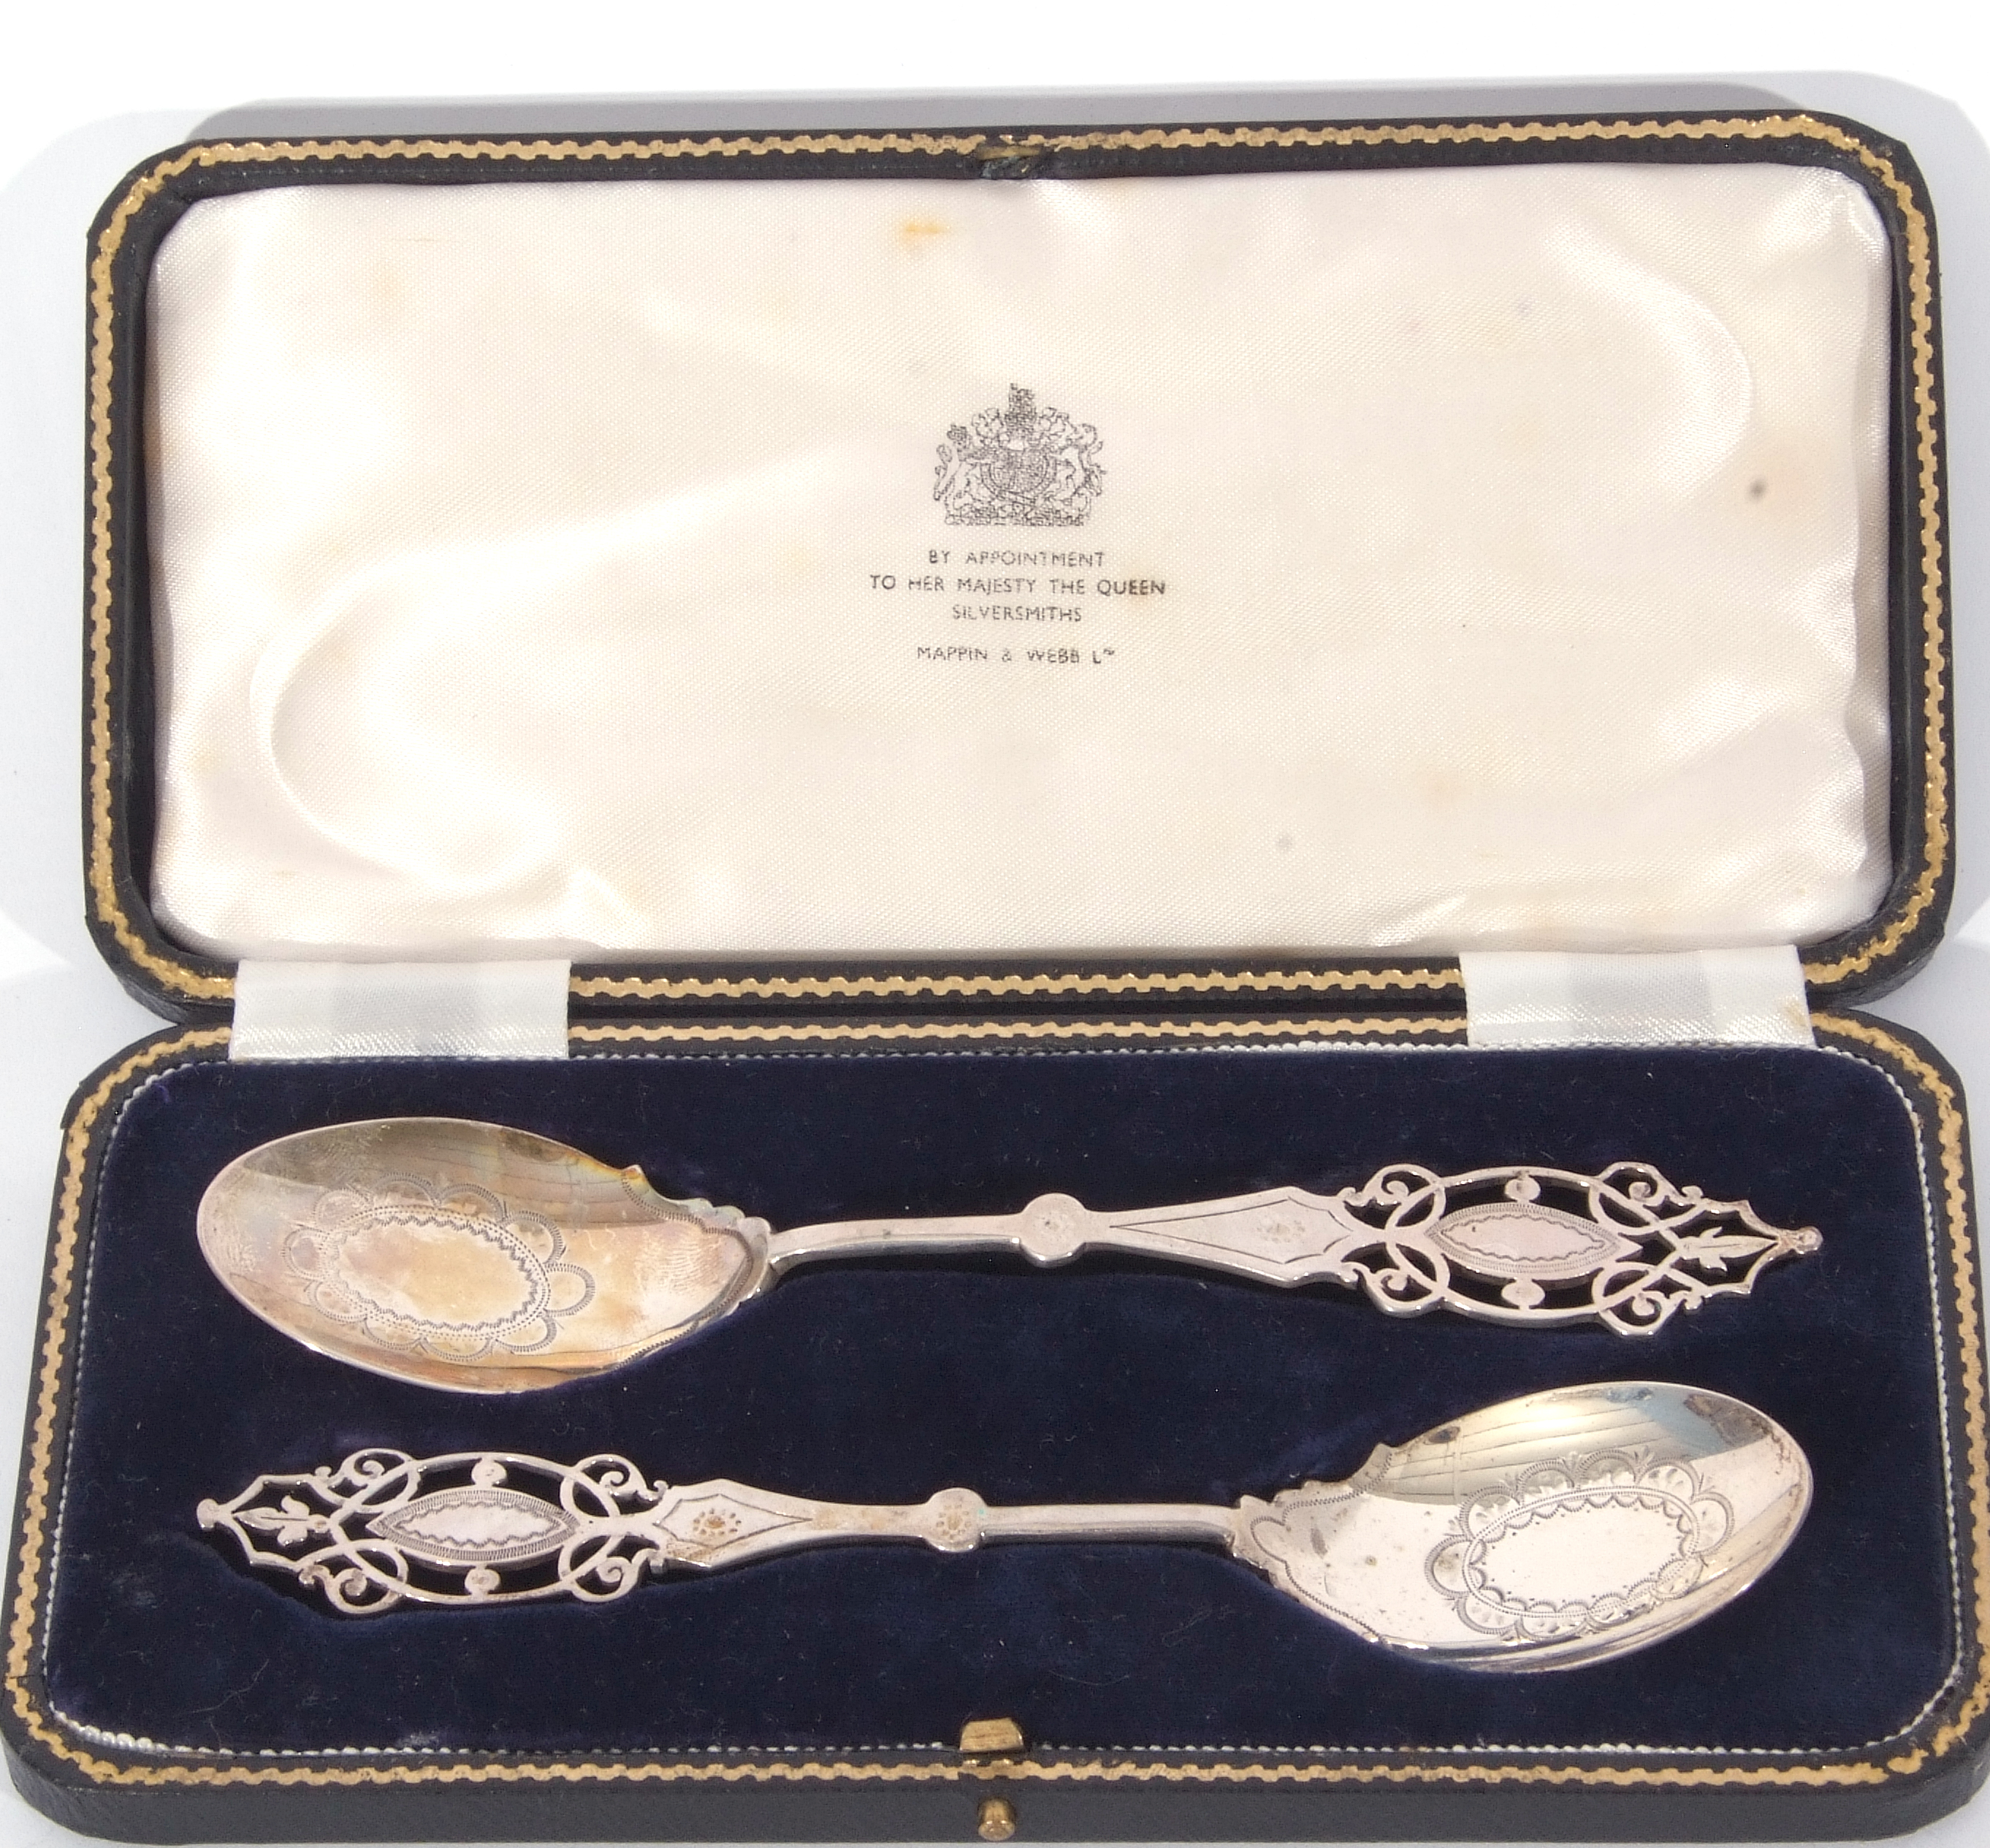 George V cased pair of presentation silver spoons with elegant pierced finials and decorated